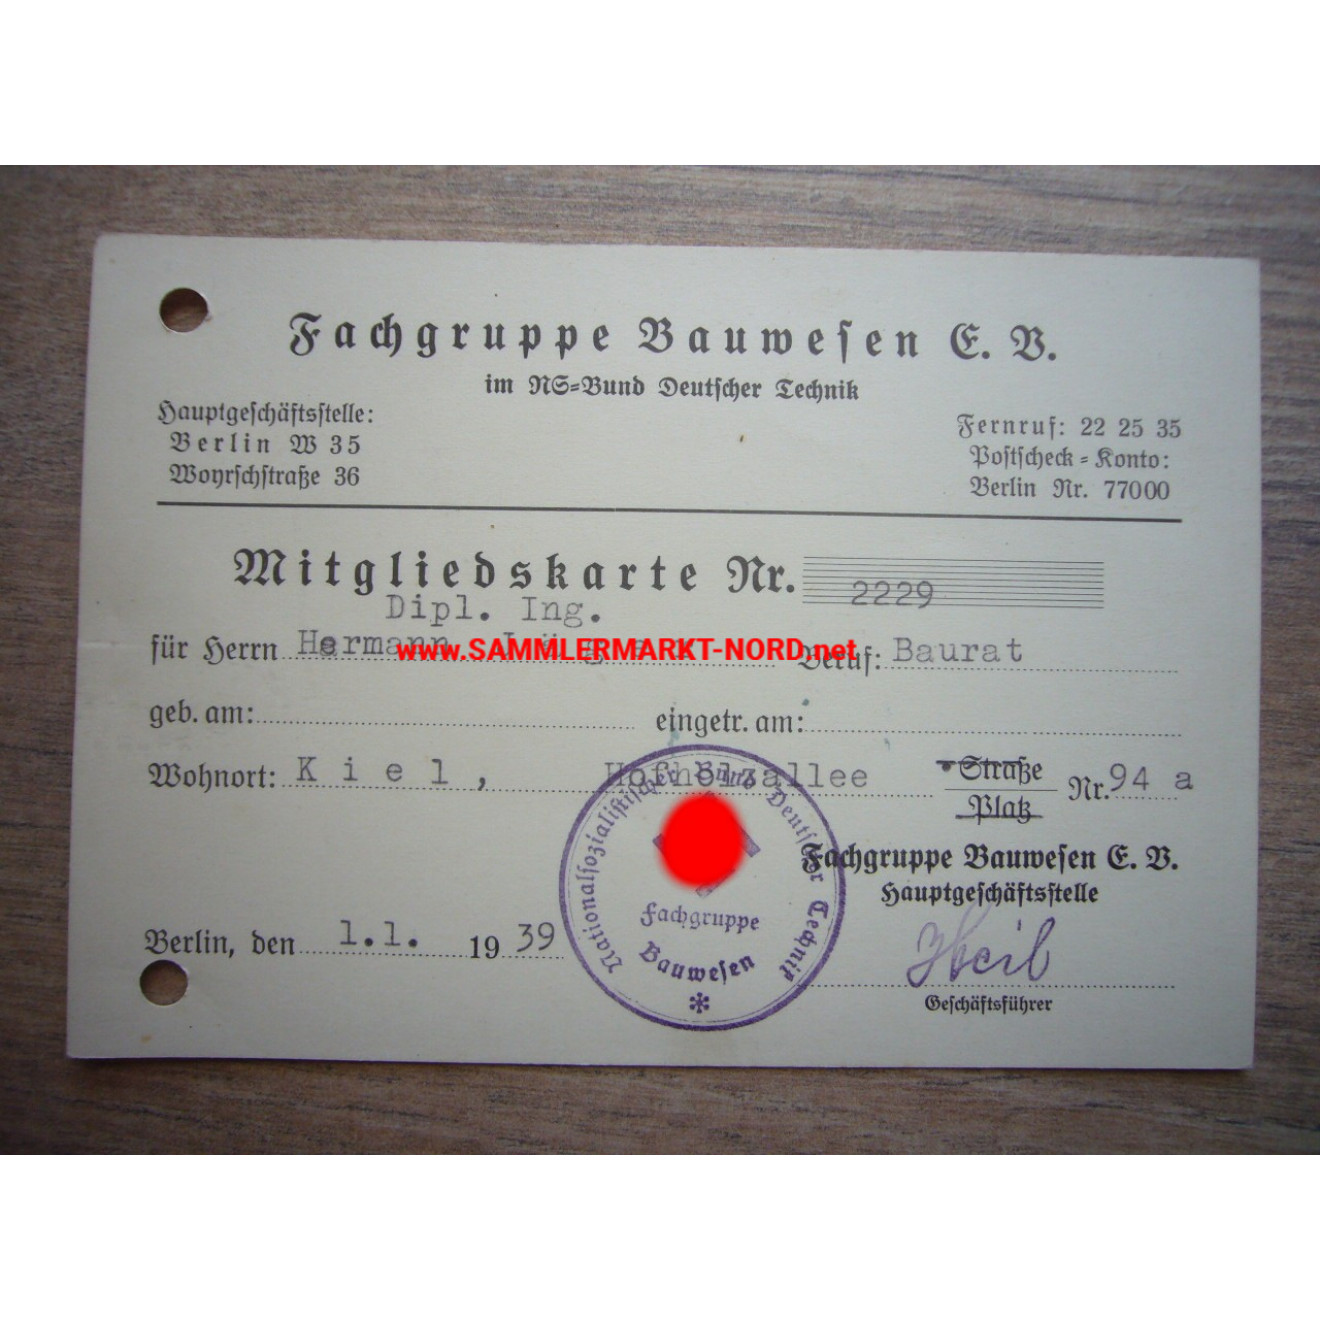 NS Federation of German Engineering - Construction Section - Membership Card